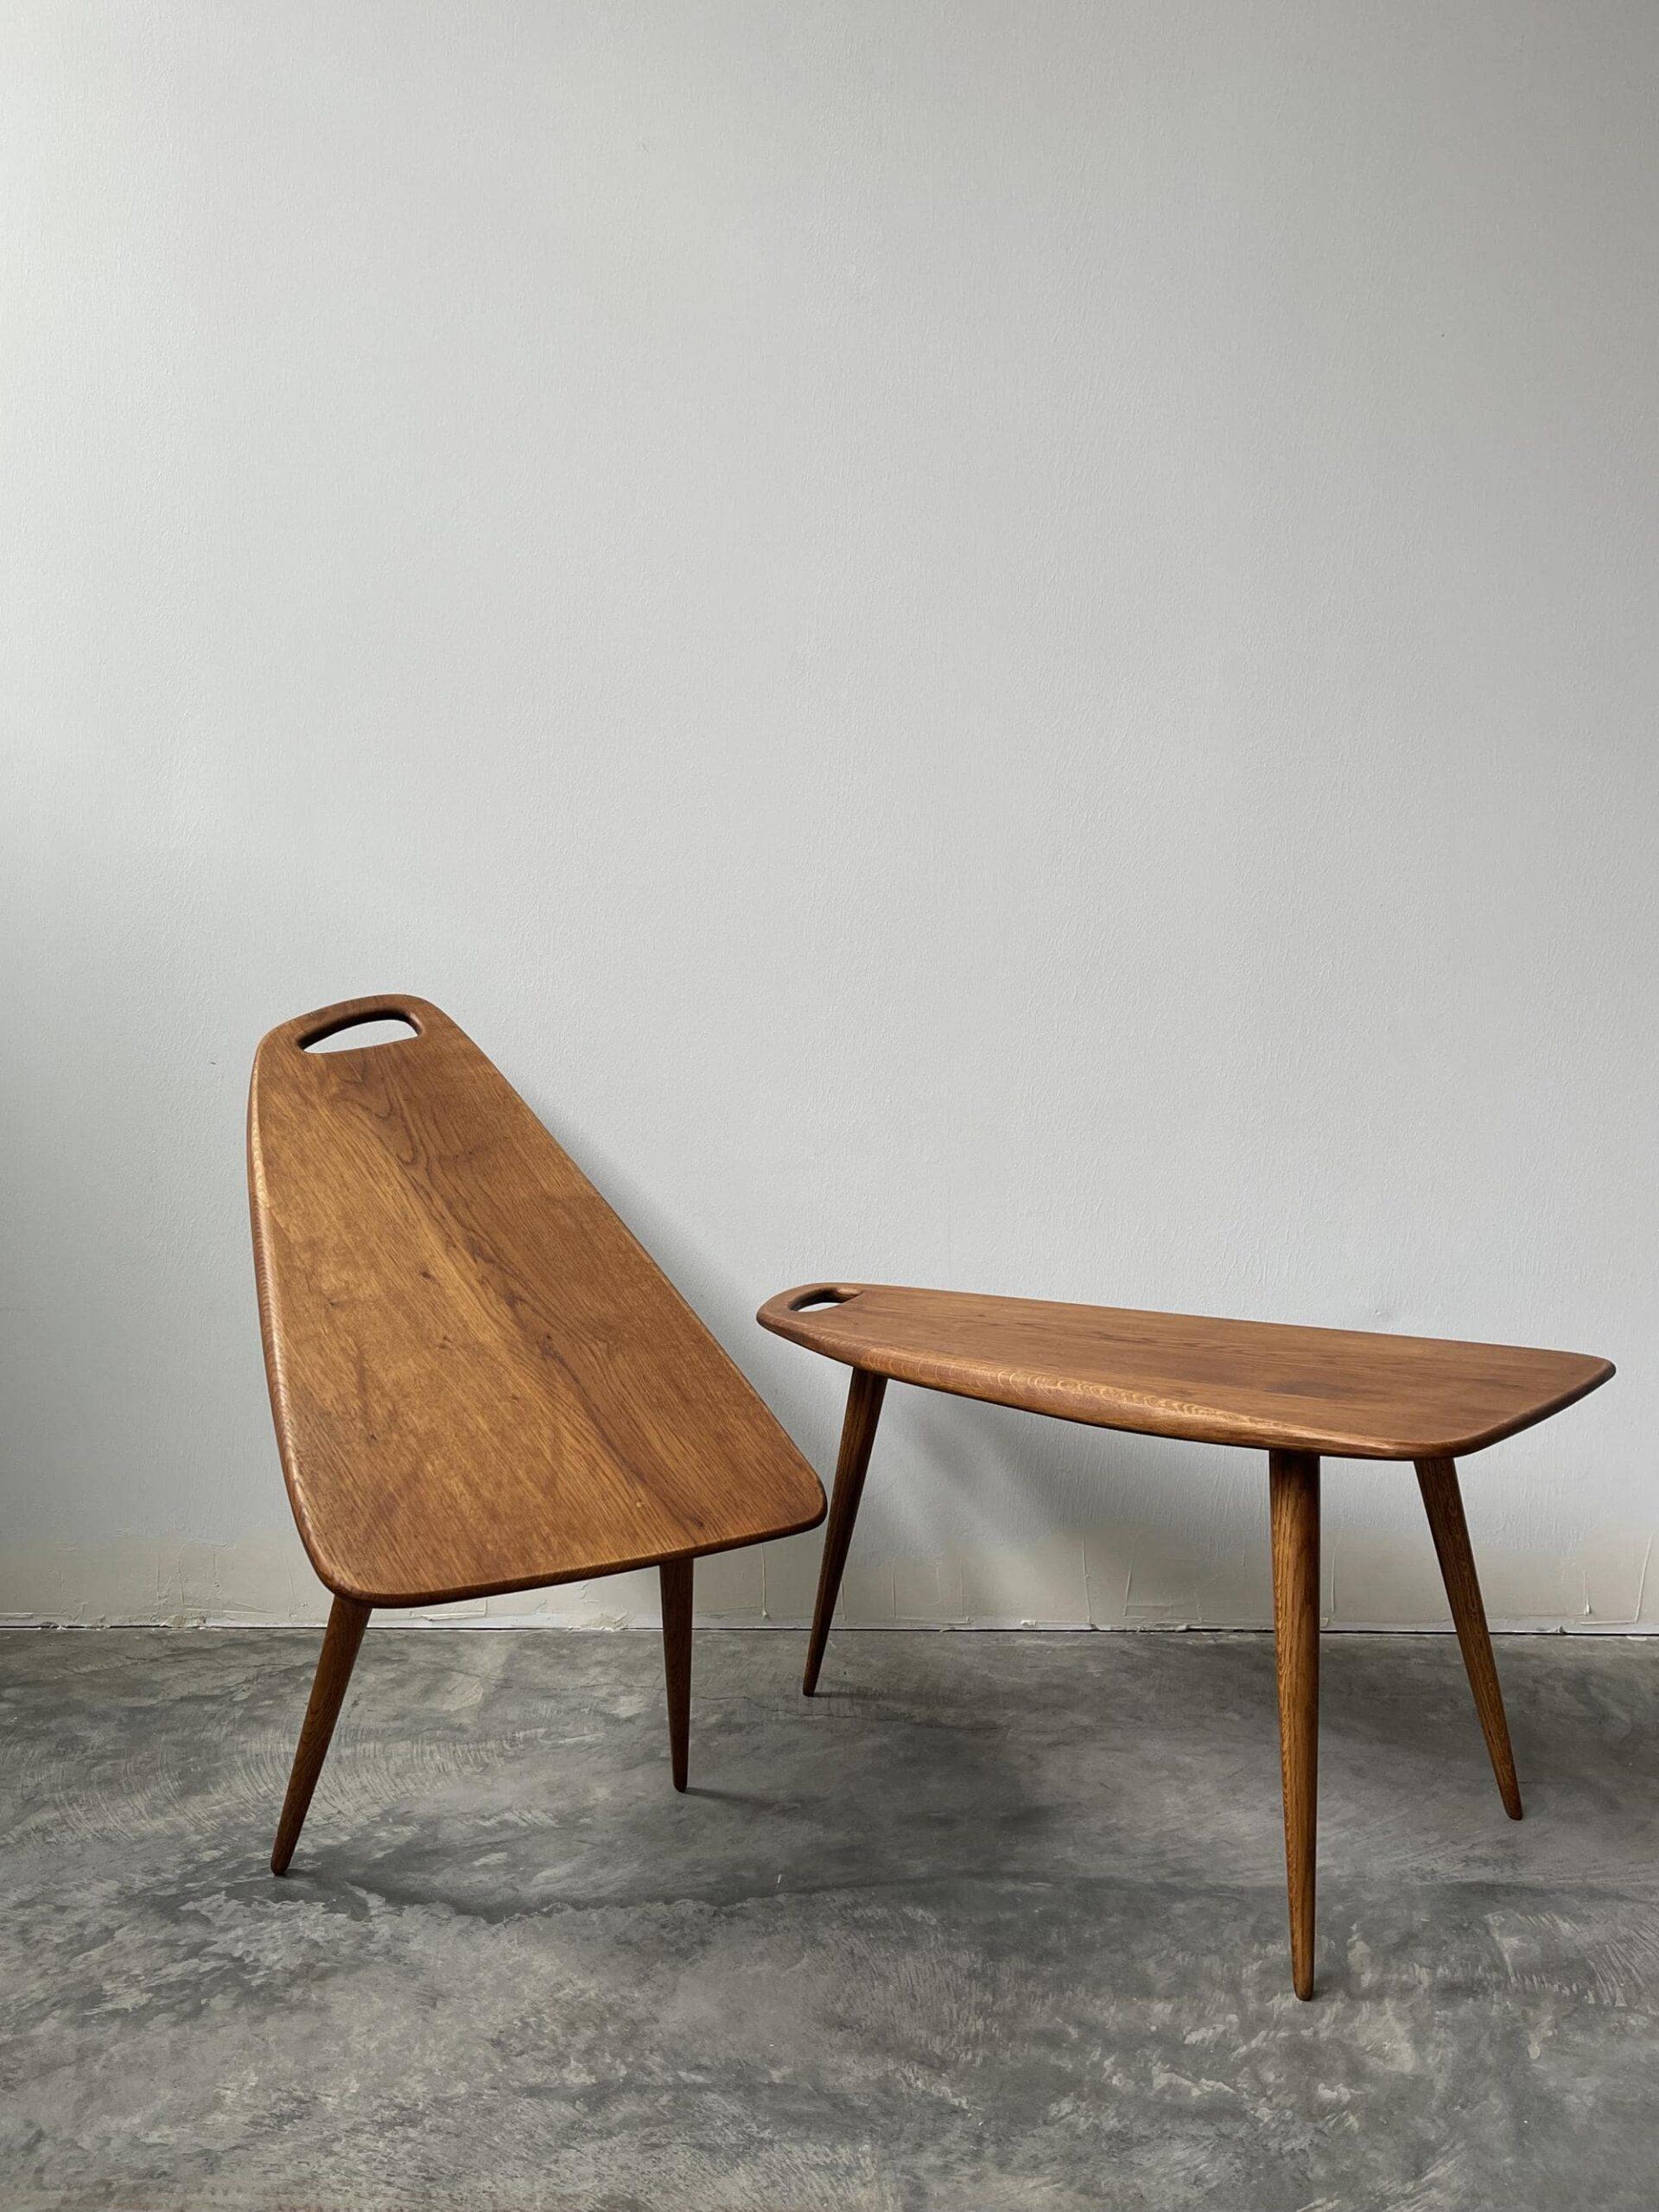 A rare pair of tripod tables in a beautiful free form design featuring a distinct handlebar cutout element reminiscent of a cutting board